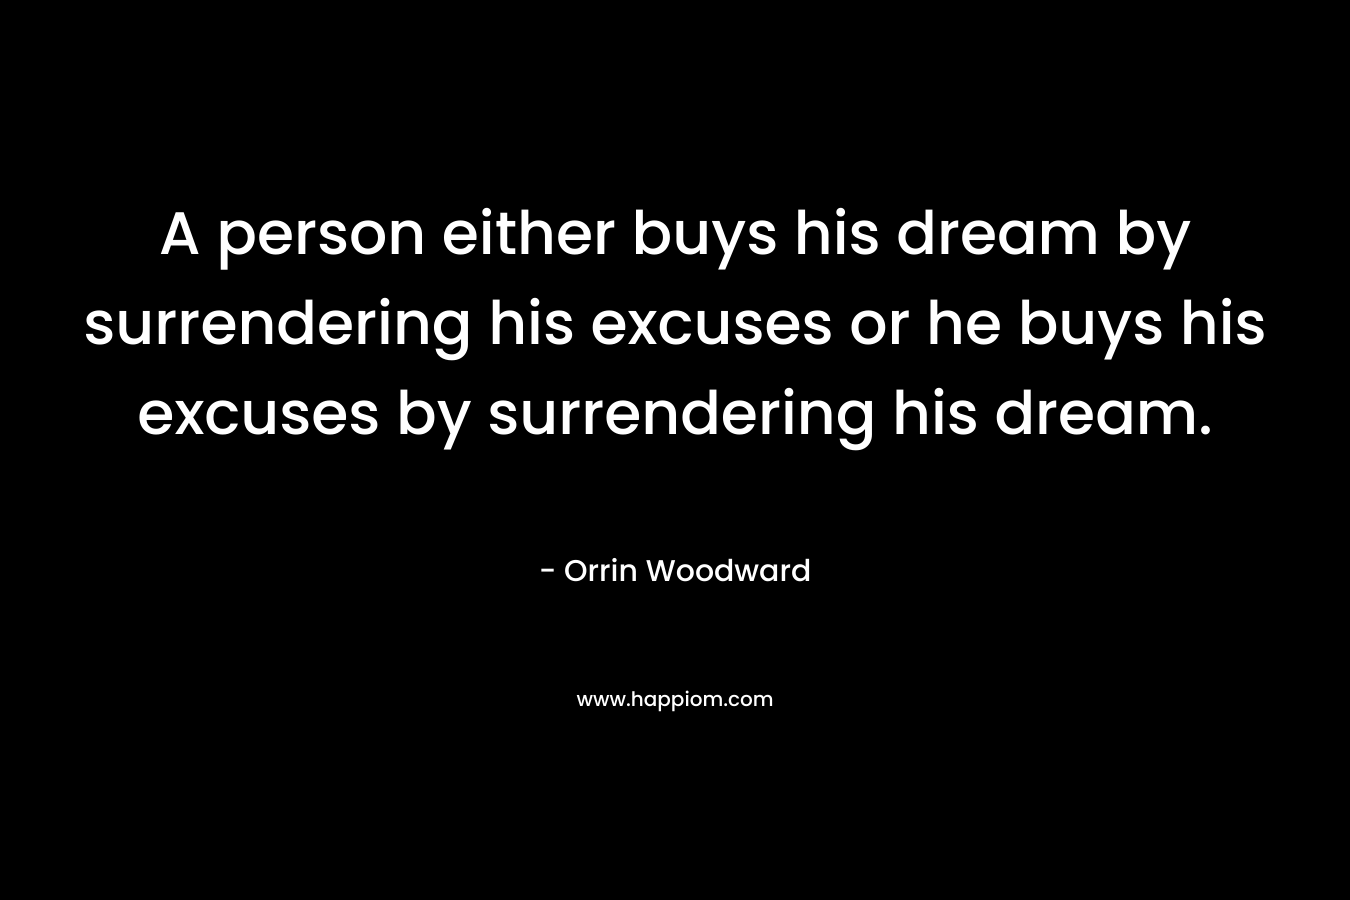 A person either buys his dream by surrendering his excuses or he buys his excuses by surrendering his dream. – Orrin Woodward